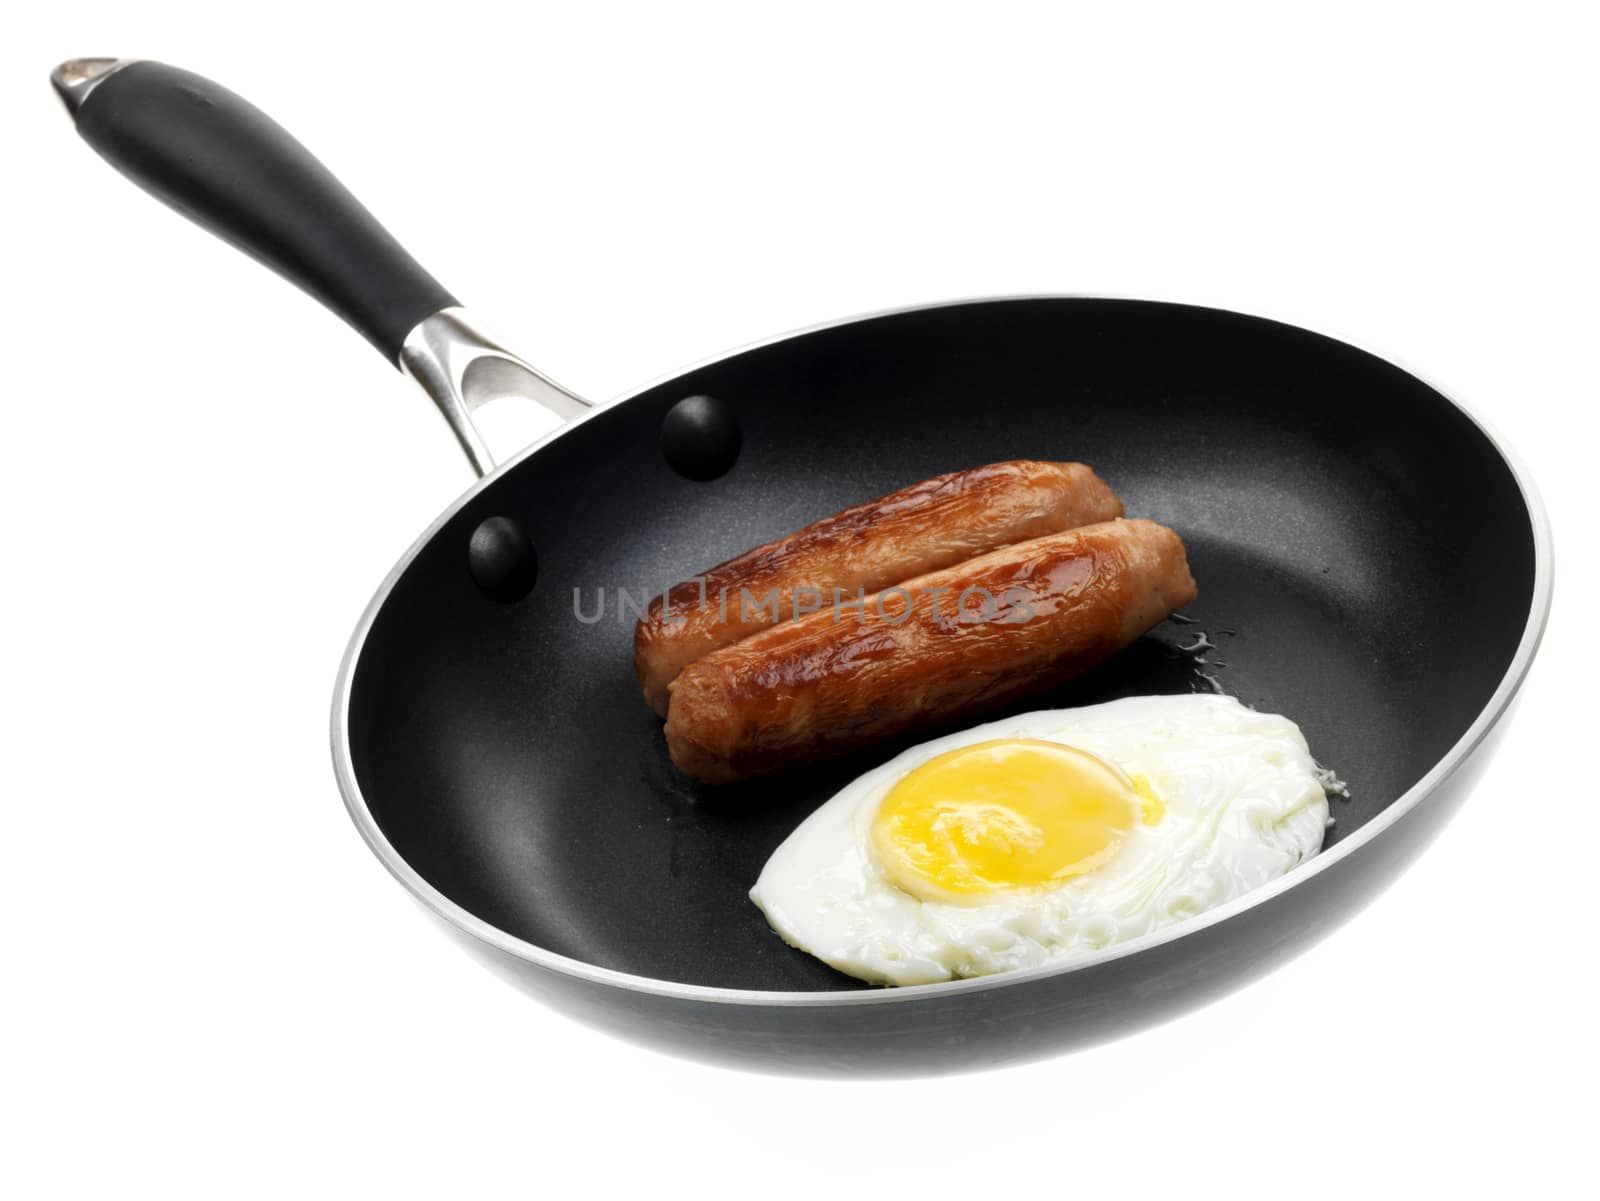 Frying Sausages and Egg by Whiteboxmedia